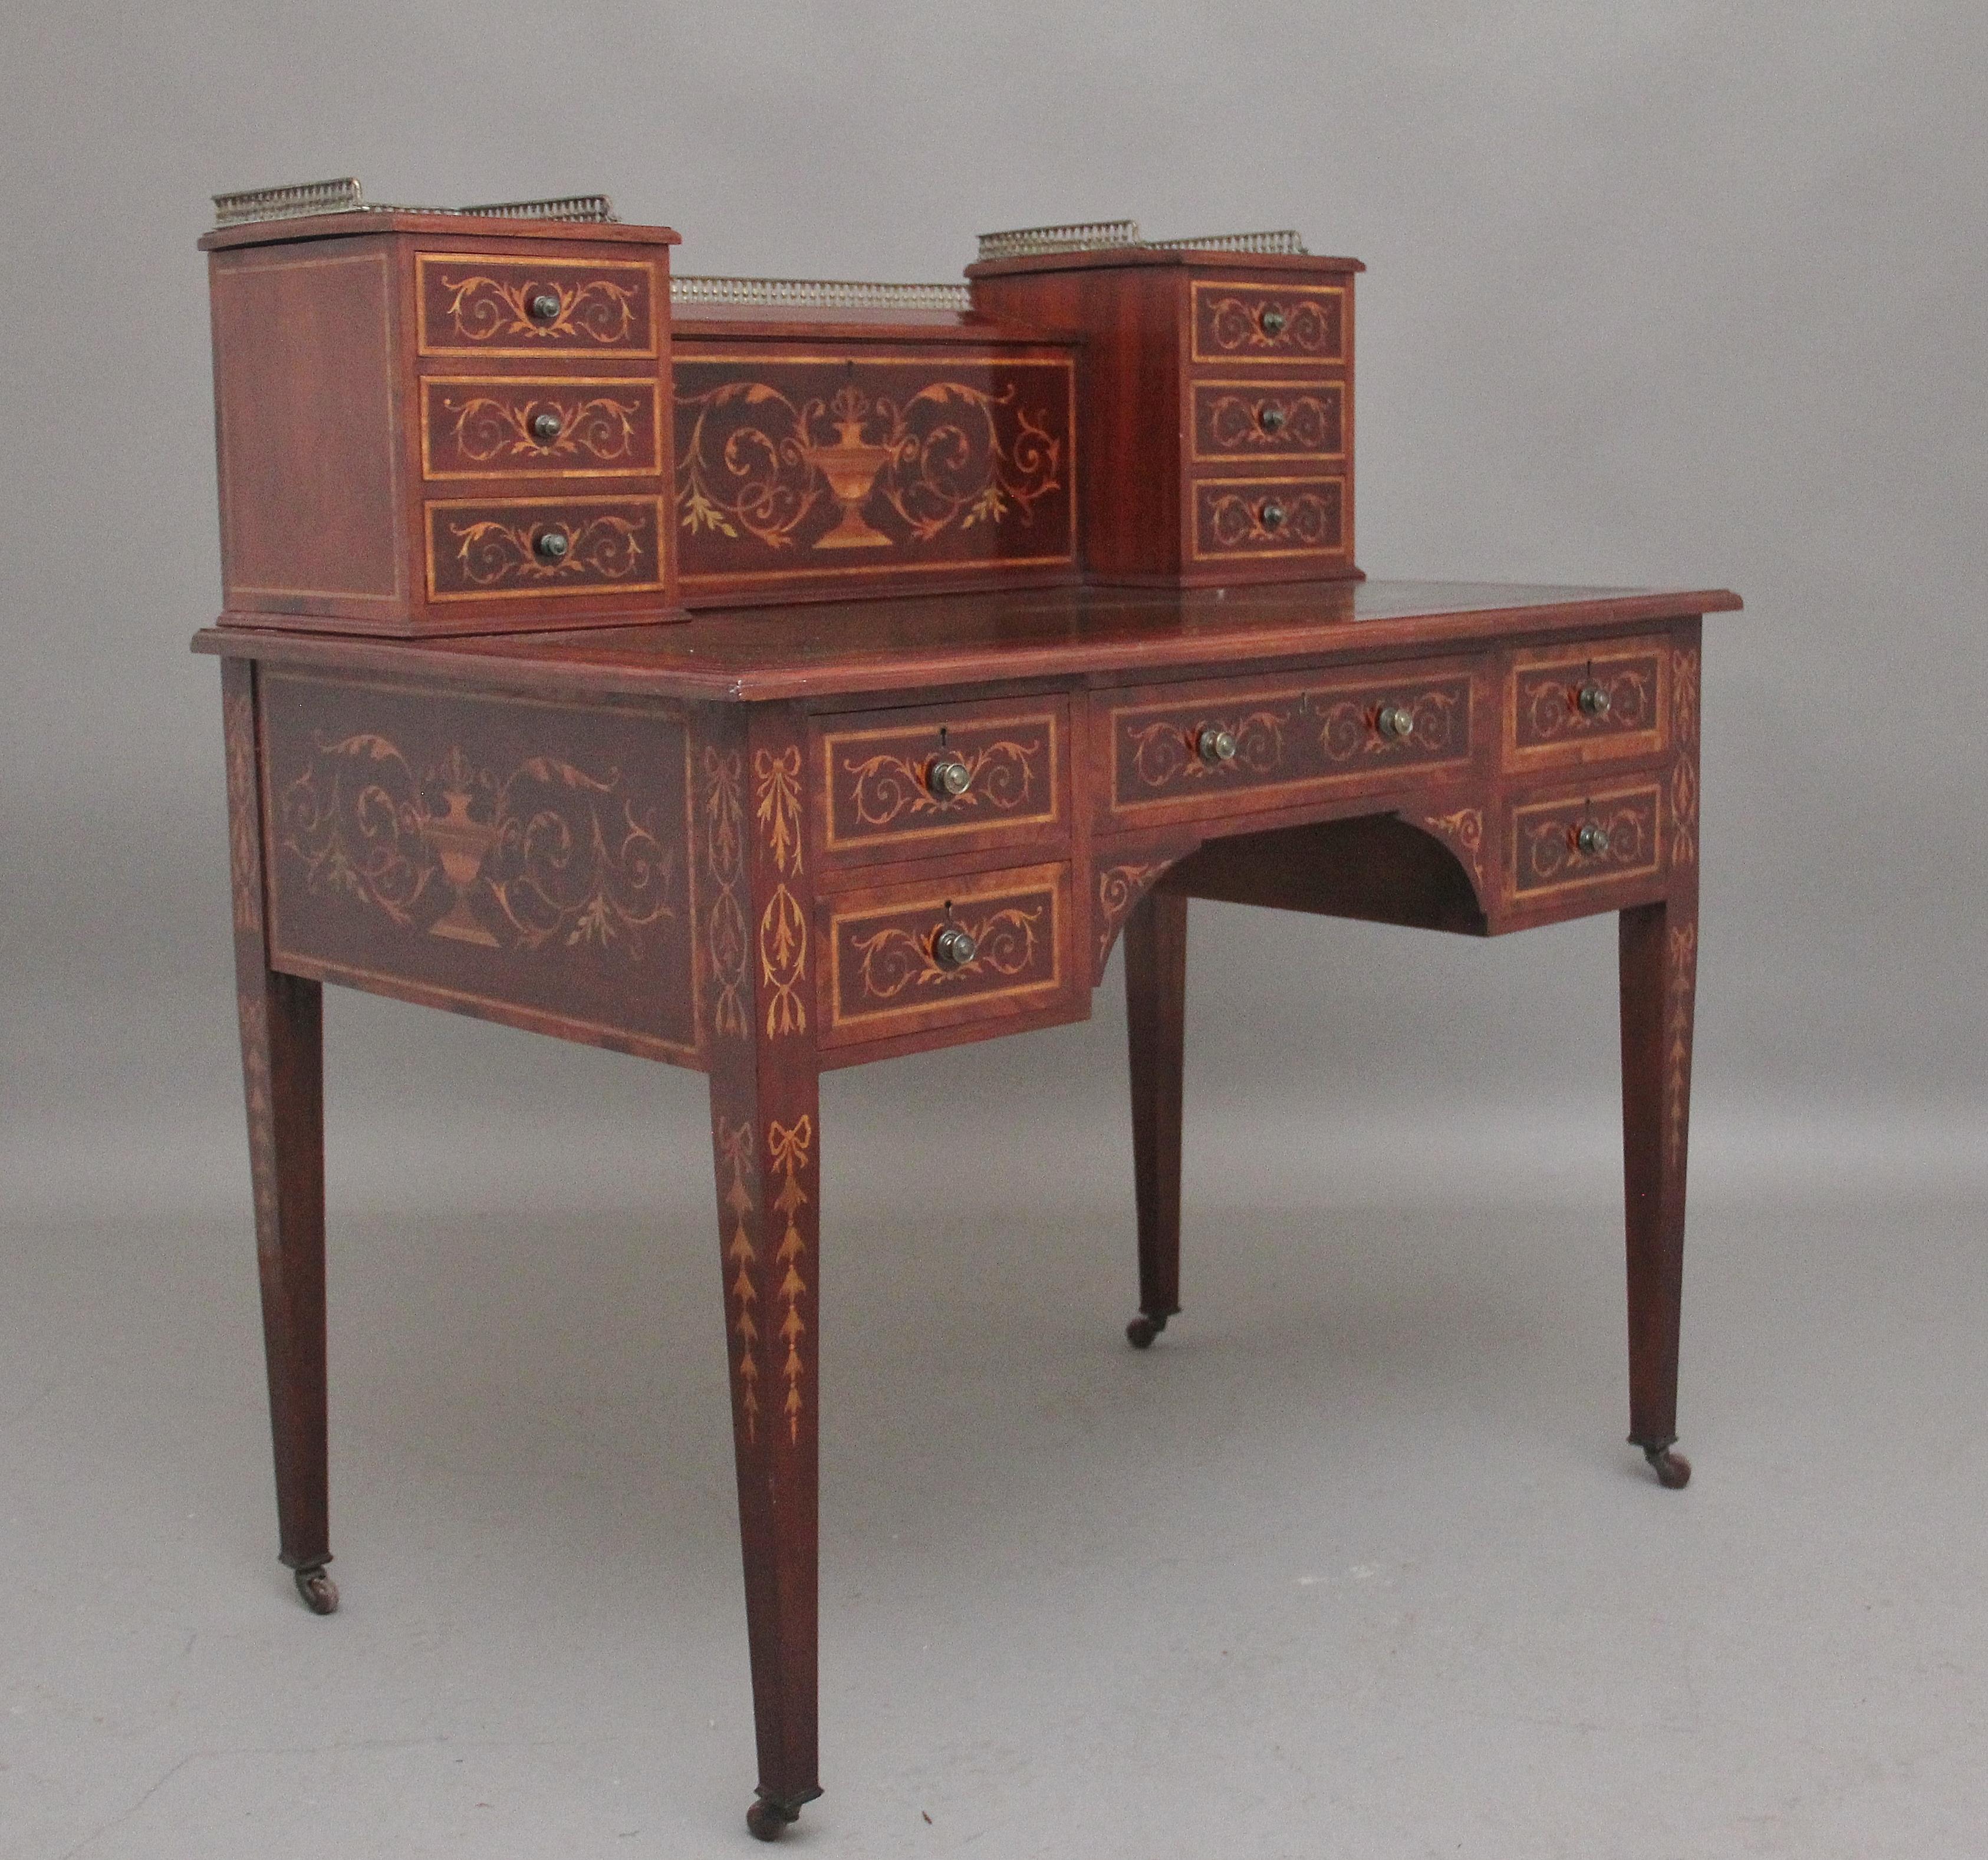 A superb quality 19th Century mahogany inlaid writing desk, the super structure comprising of three mahogany lined drawers either side with the original turned brass knob handles and ornate floral inlay on the drawer fronts, a stationary compartment